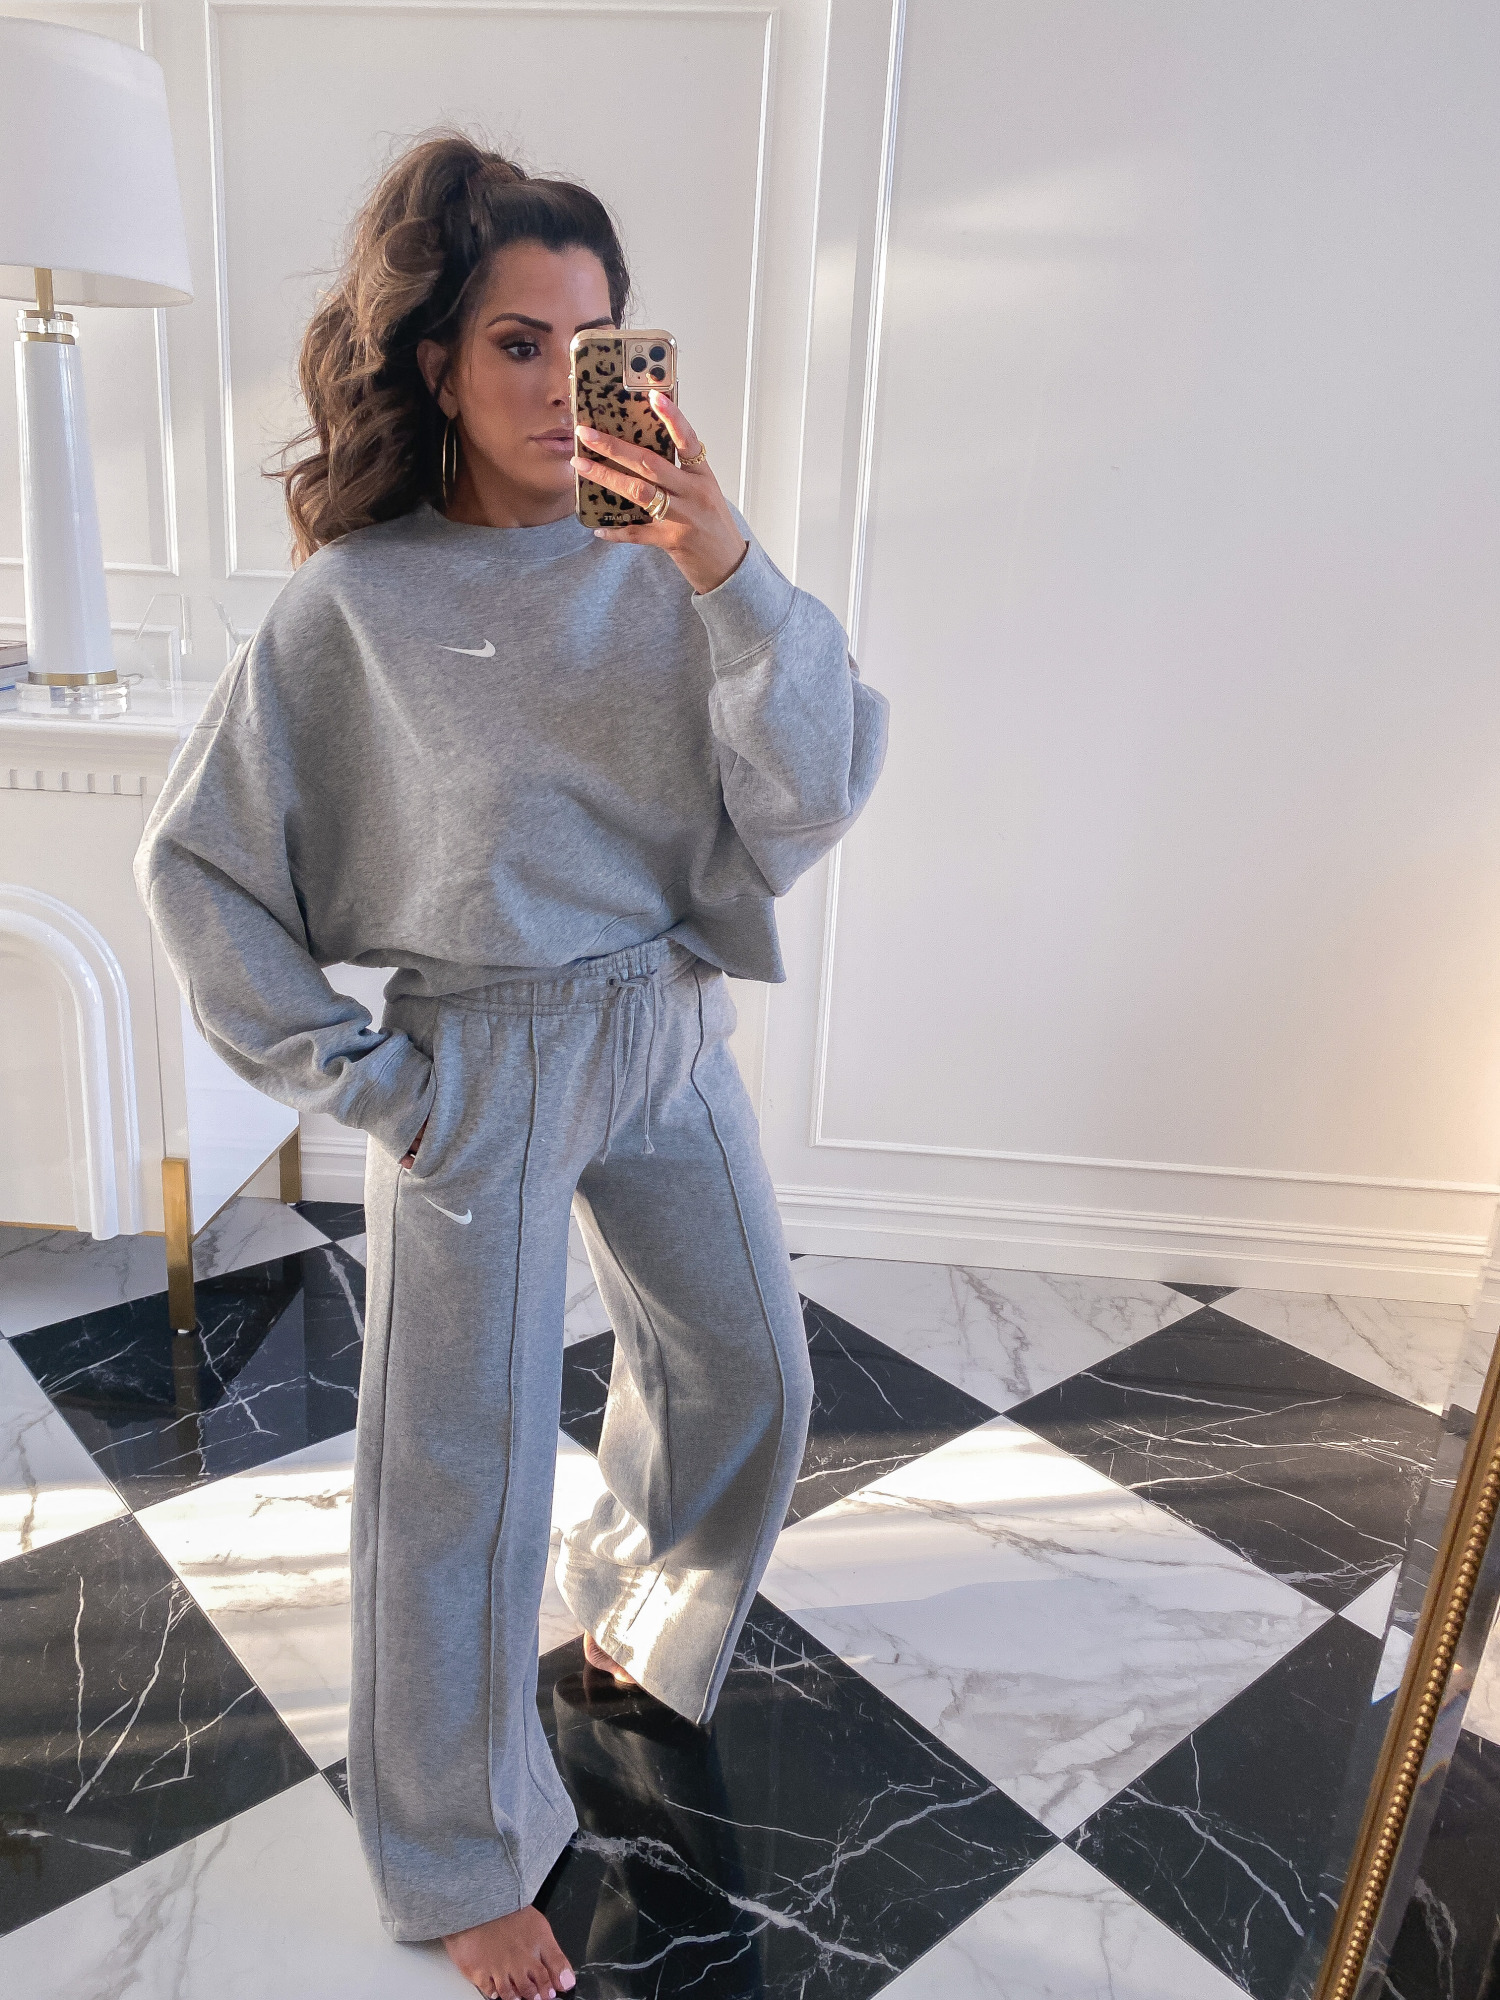 Nordstrom Anniversary Sale 2020 try on guide, NSALE 2020 nike womens, emily gemma | Nordstrom Anniversary Sale by popular US fashion blog, The Sweetest Thing: image of Emily Gemma wearing a NIKE Crewneck Sweatshirt and NIKE Palazzo Pants.